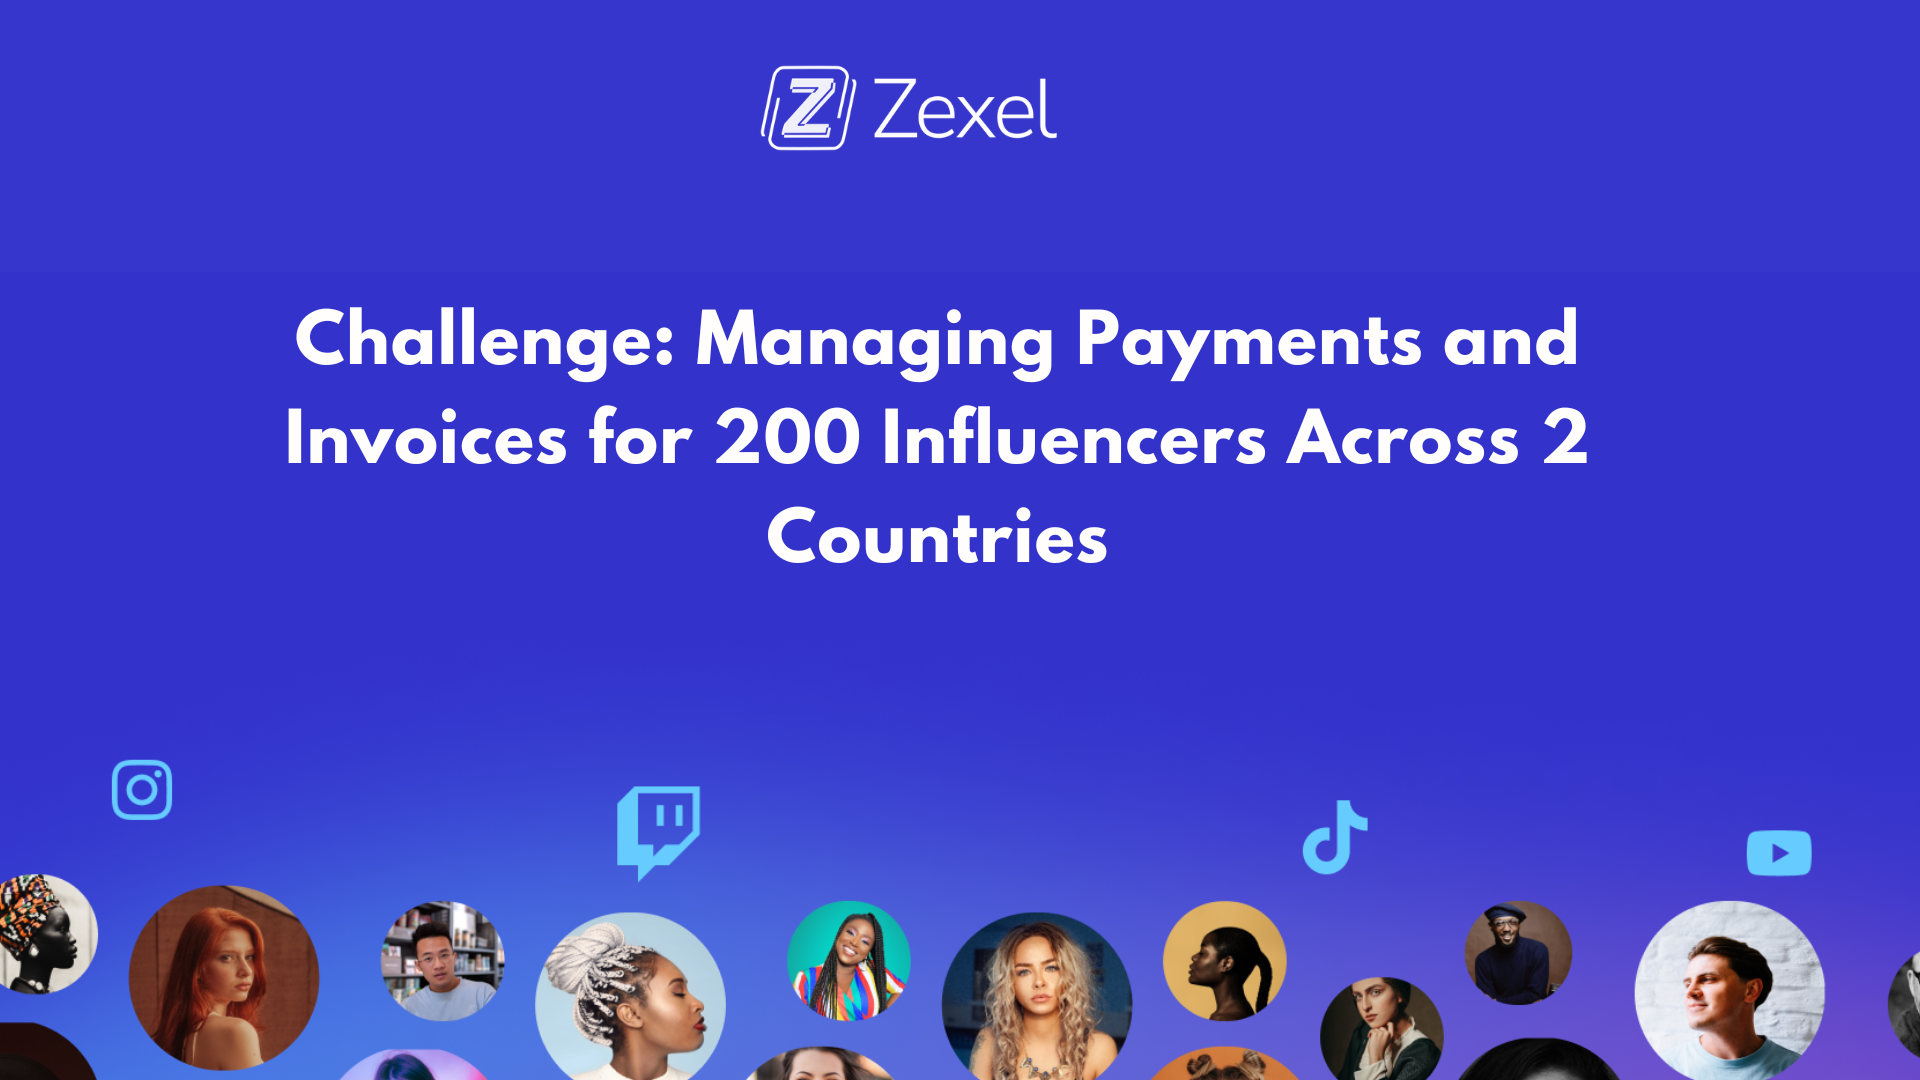 Efficiently Managing Influencer Payments Across Borders